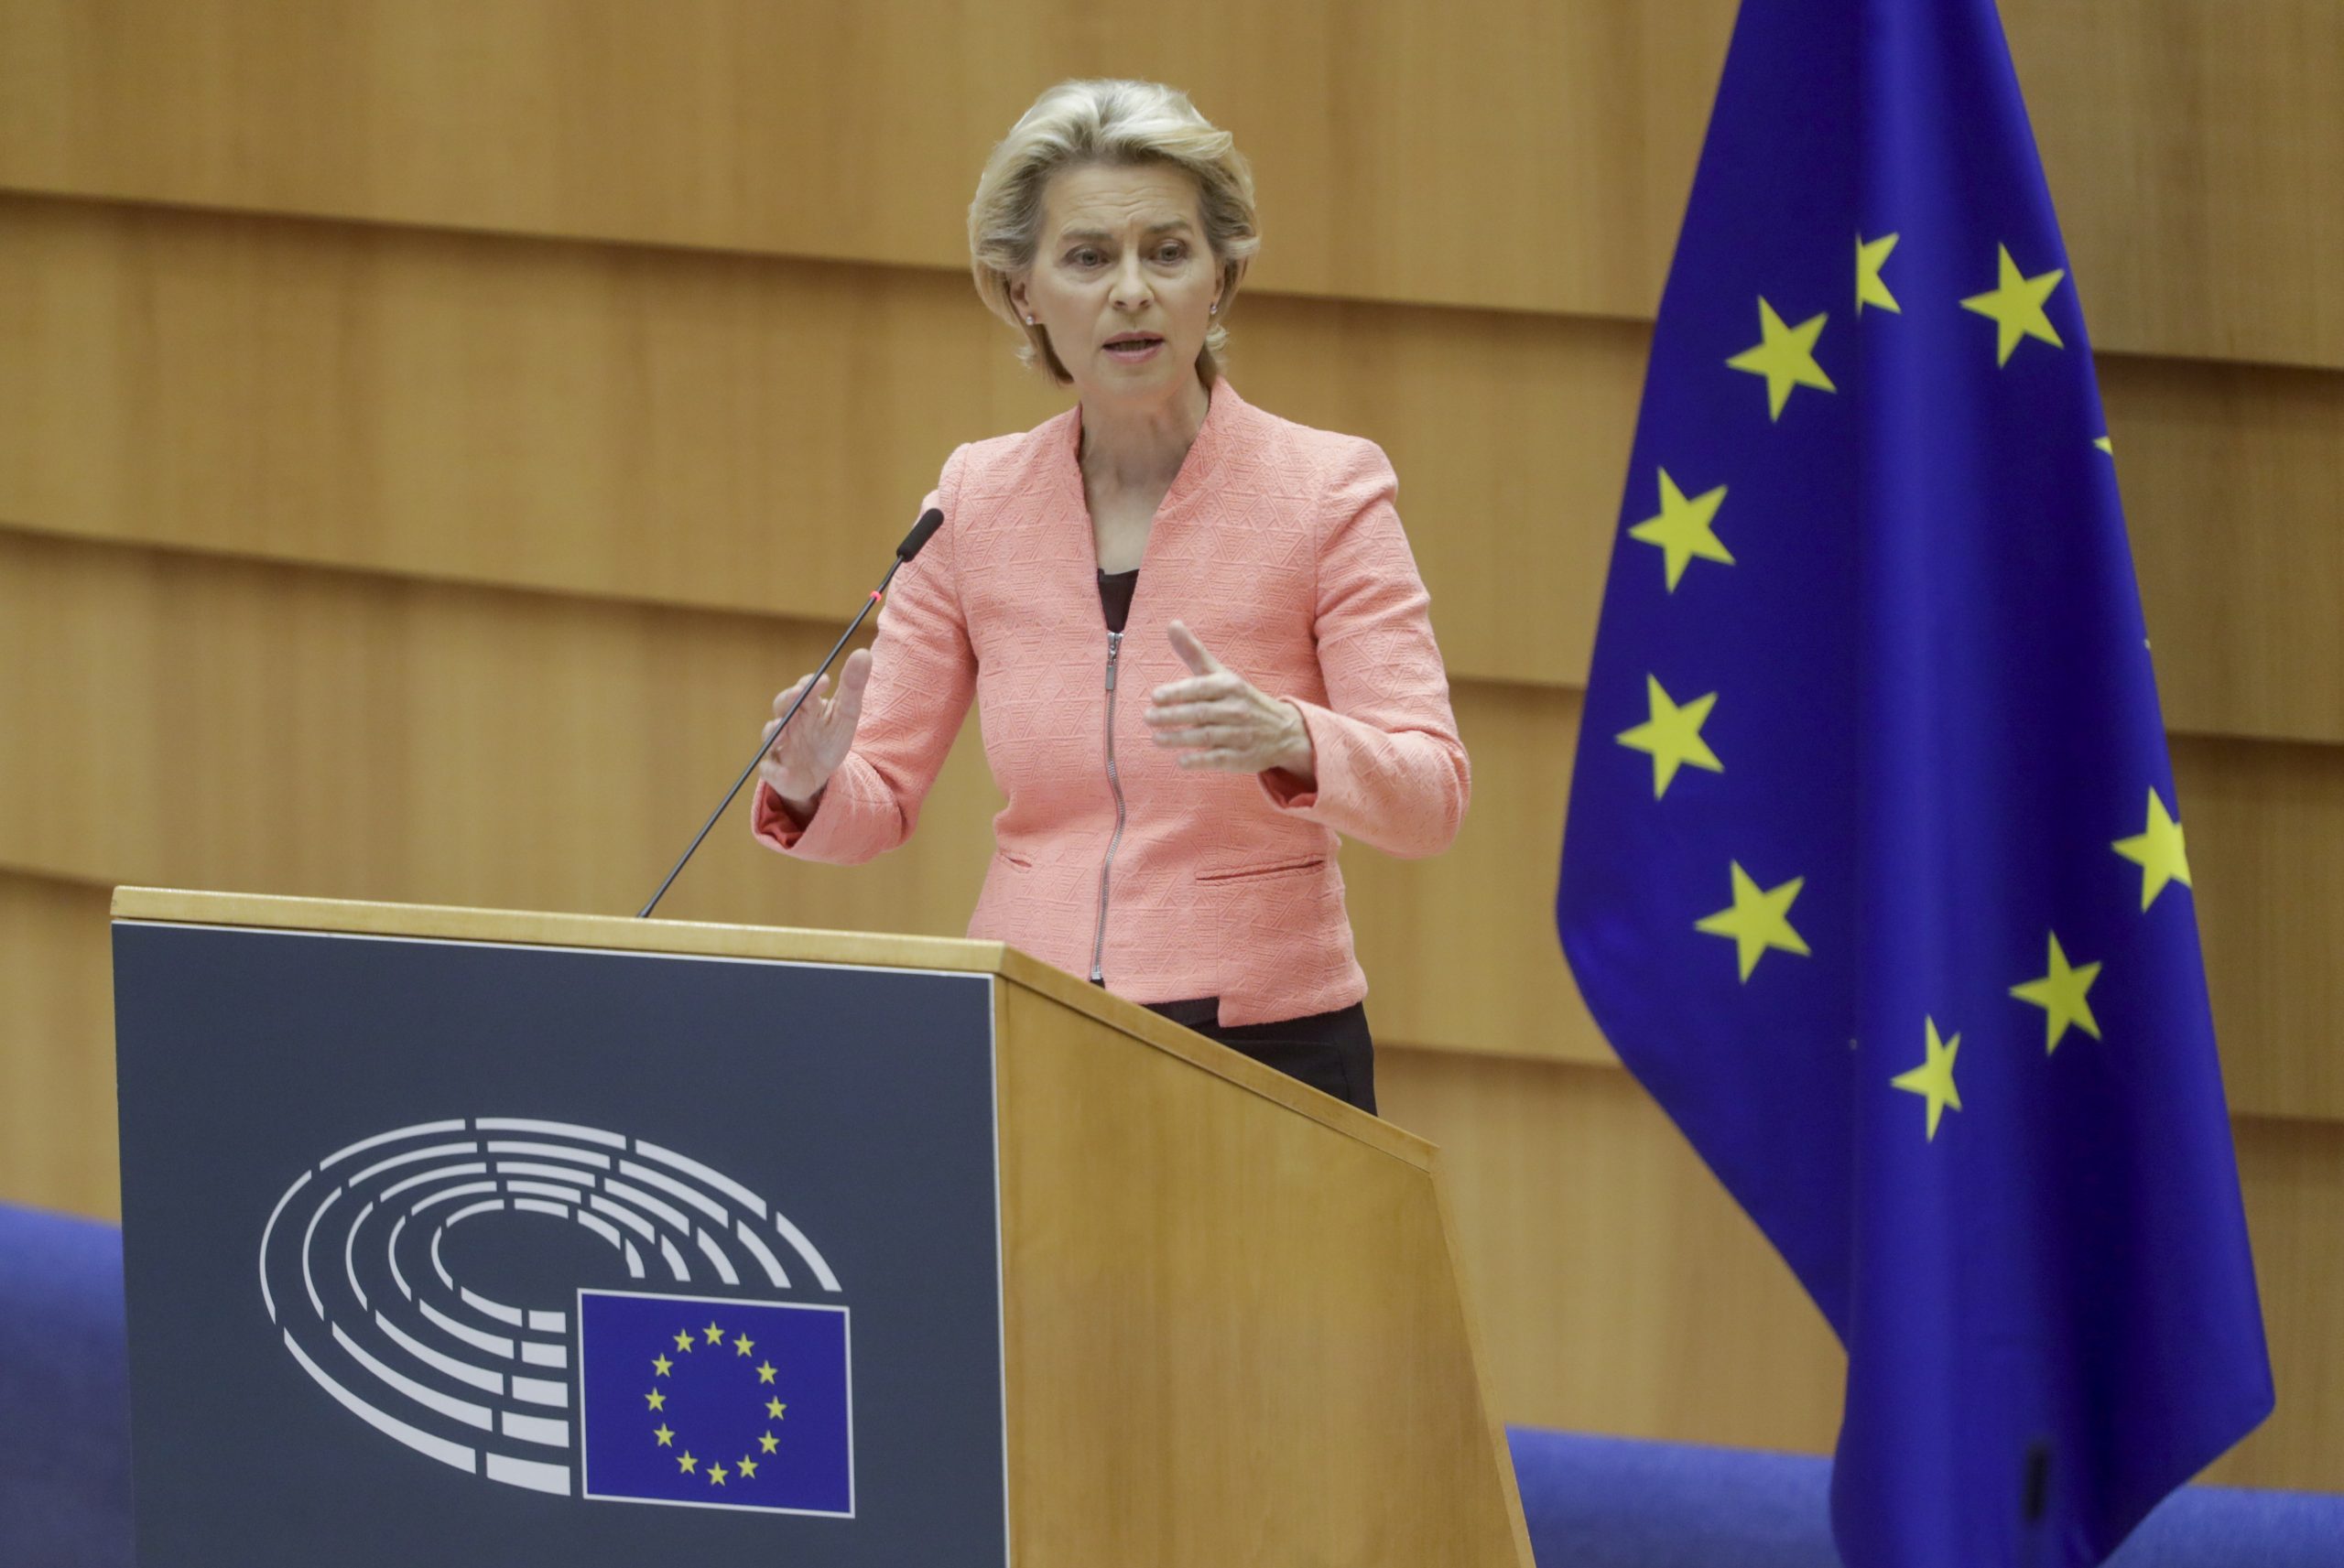 Von der Leyen Urges Joint EU Fight Against Coronavirus, Wants EU Funds Tied to Rule of Law Criteria